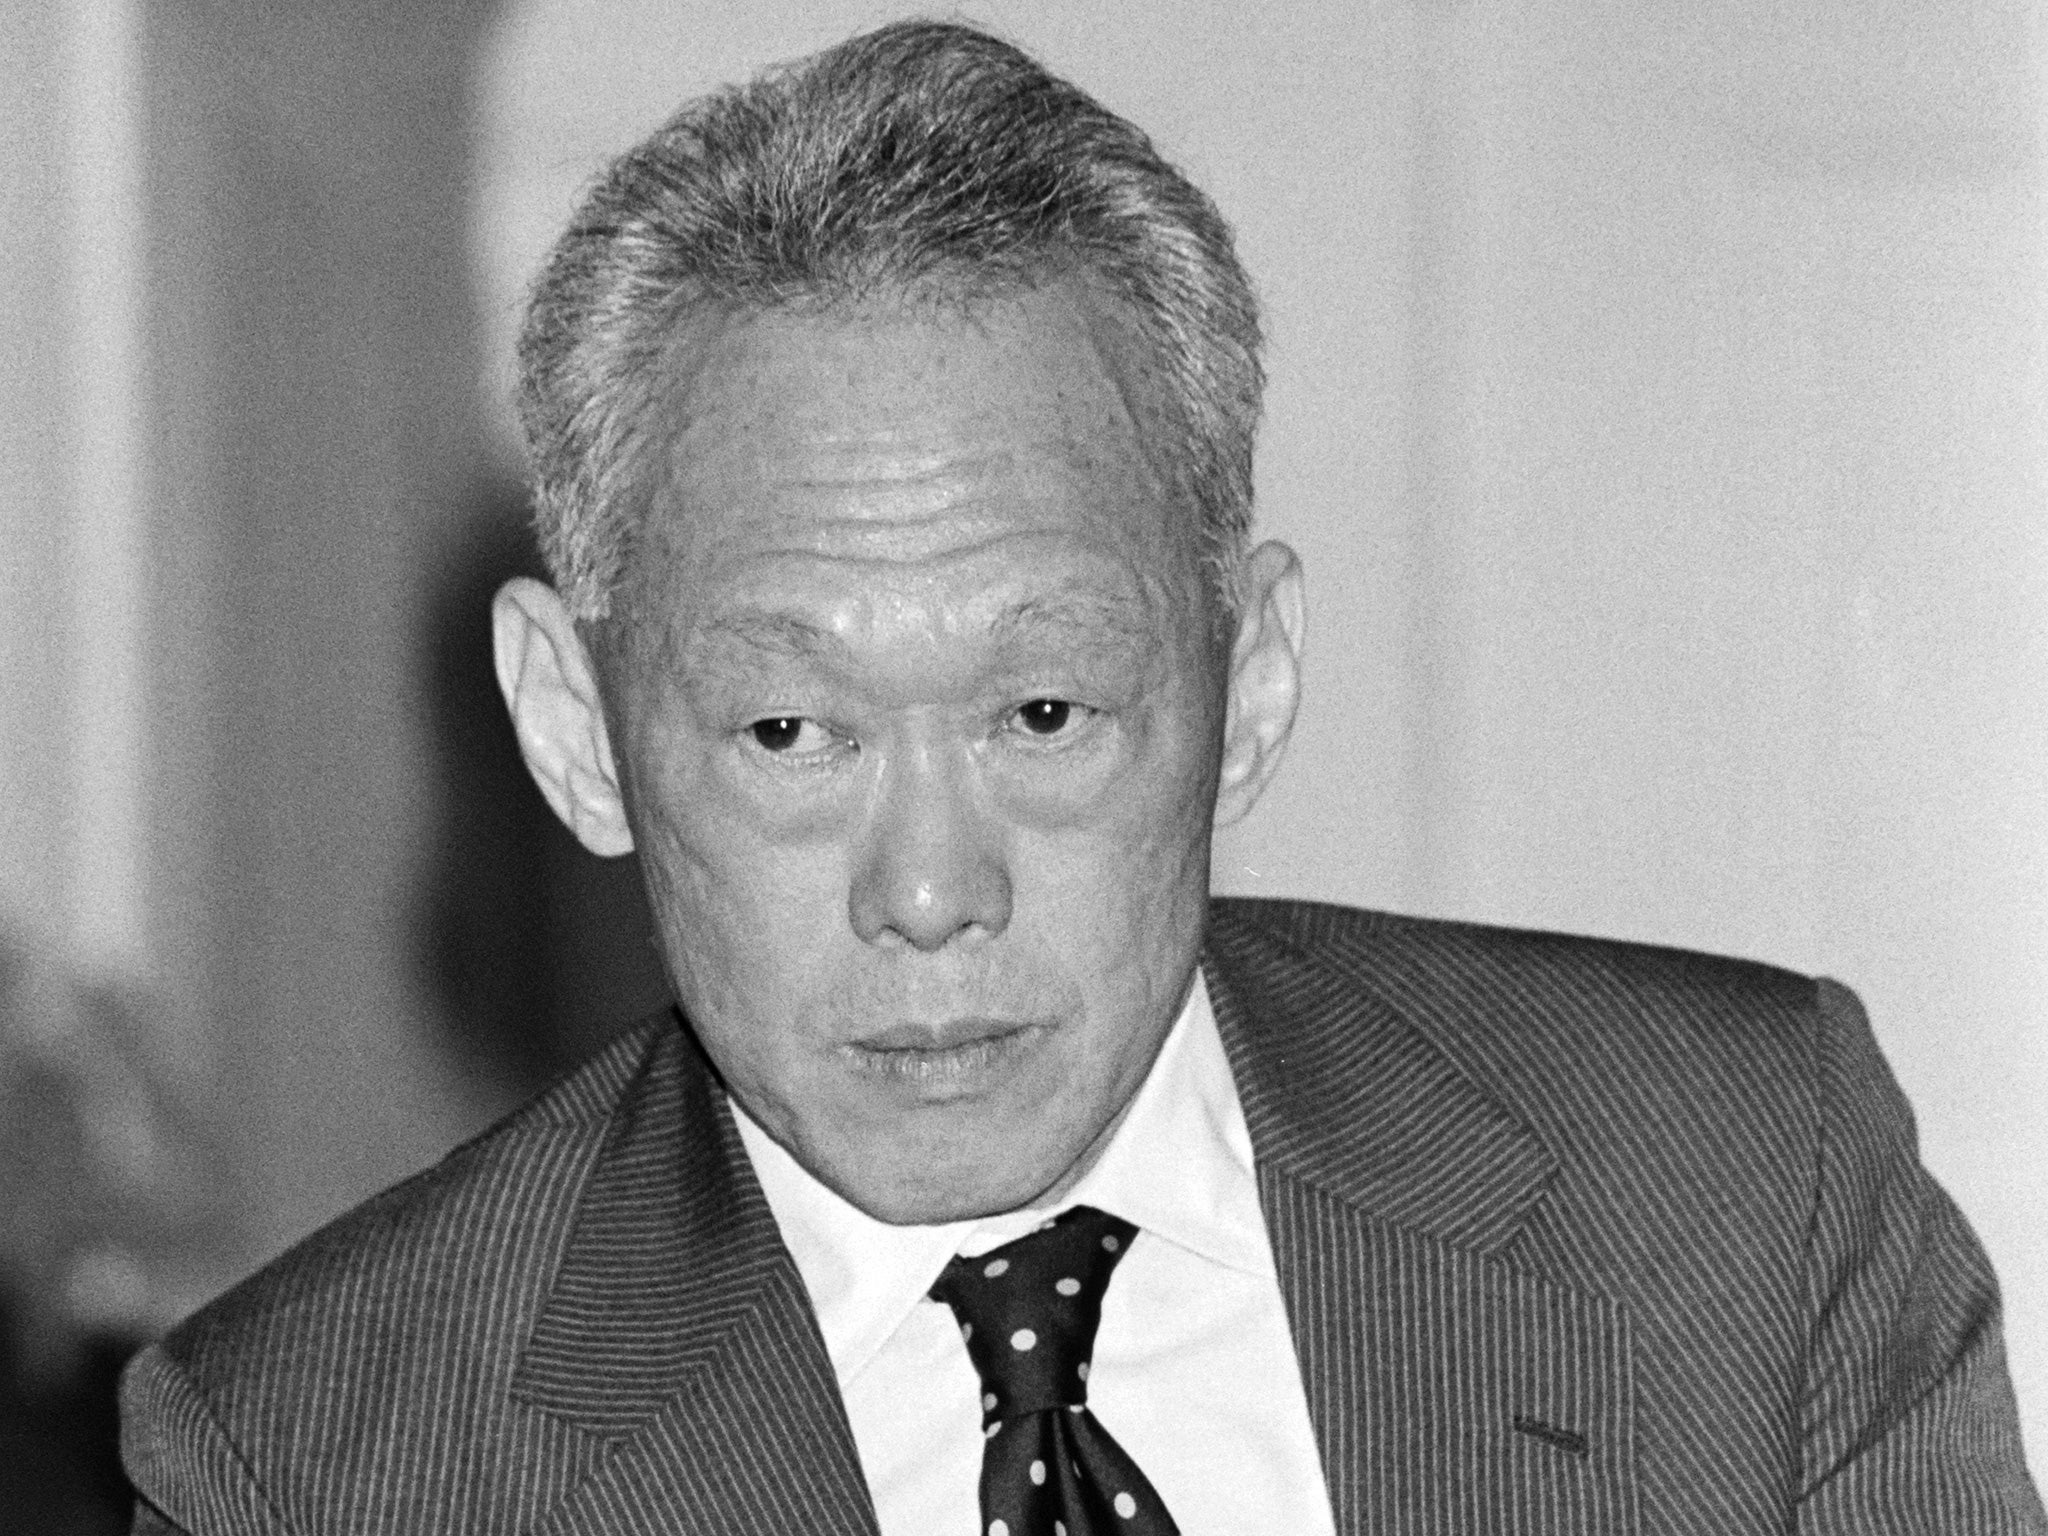 Lee Kuan Yew during an official visit in France, April 1985